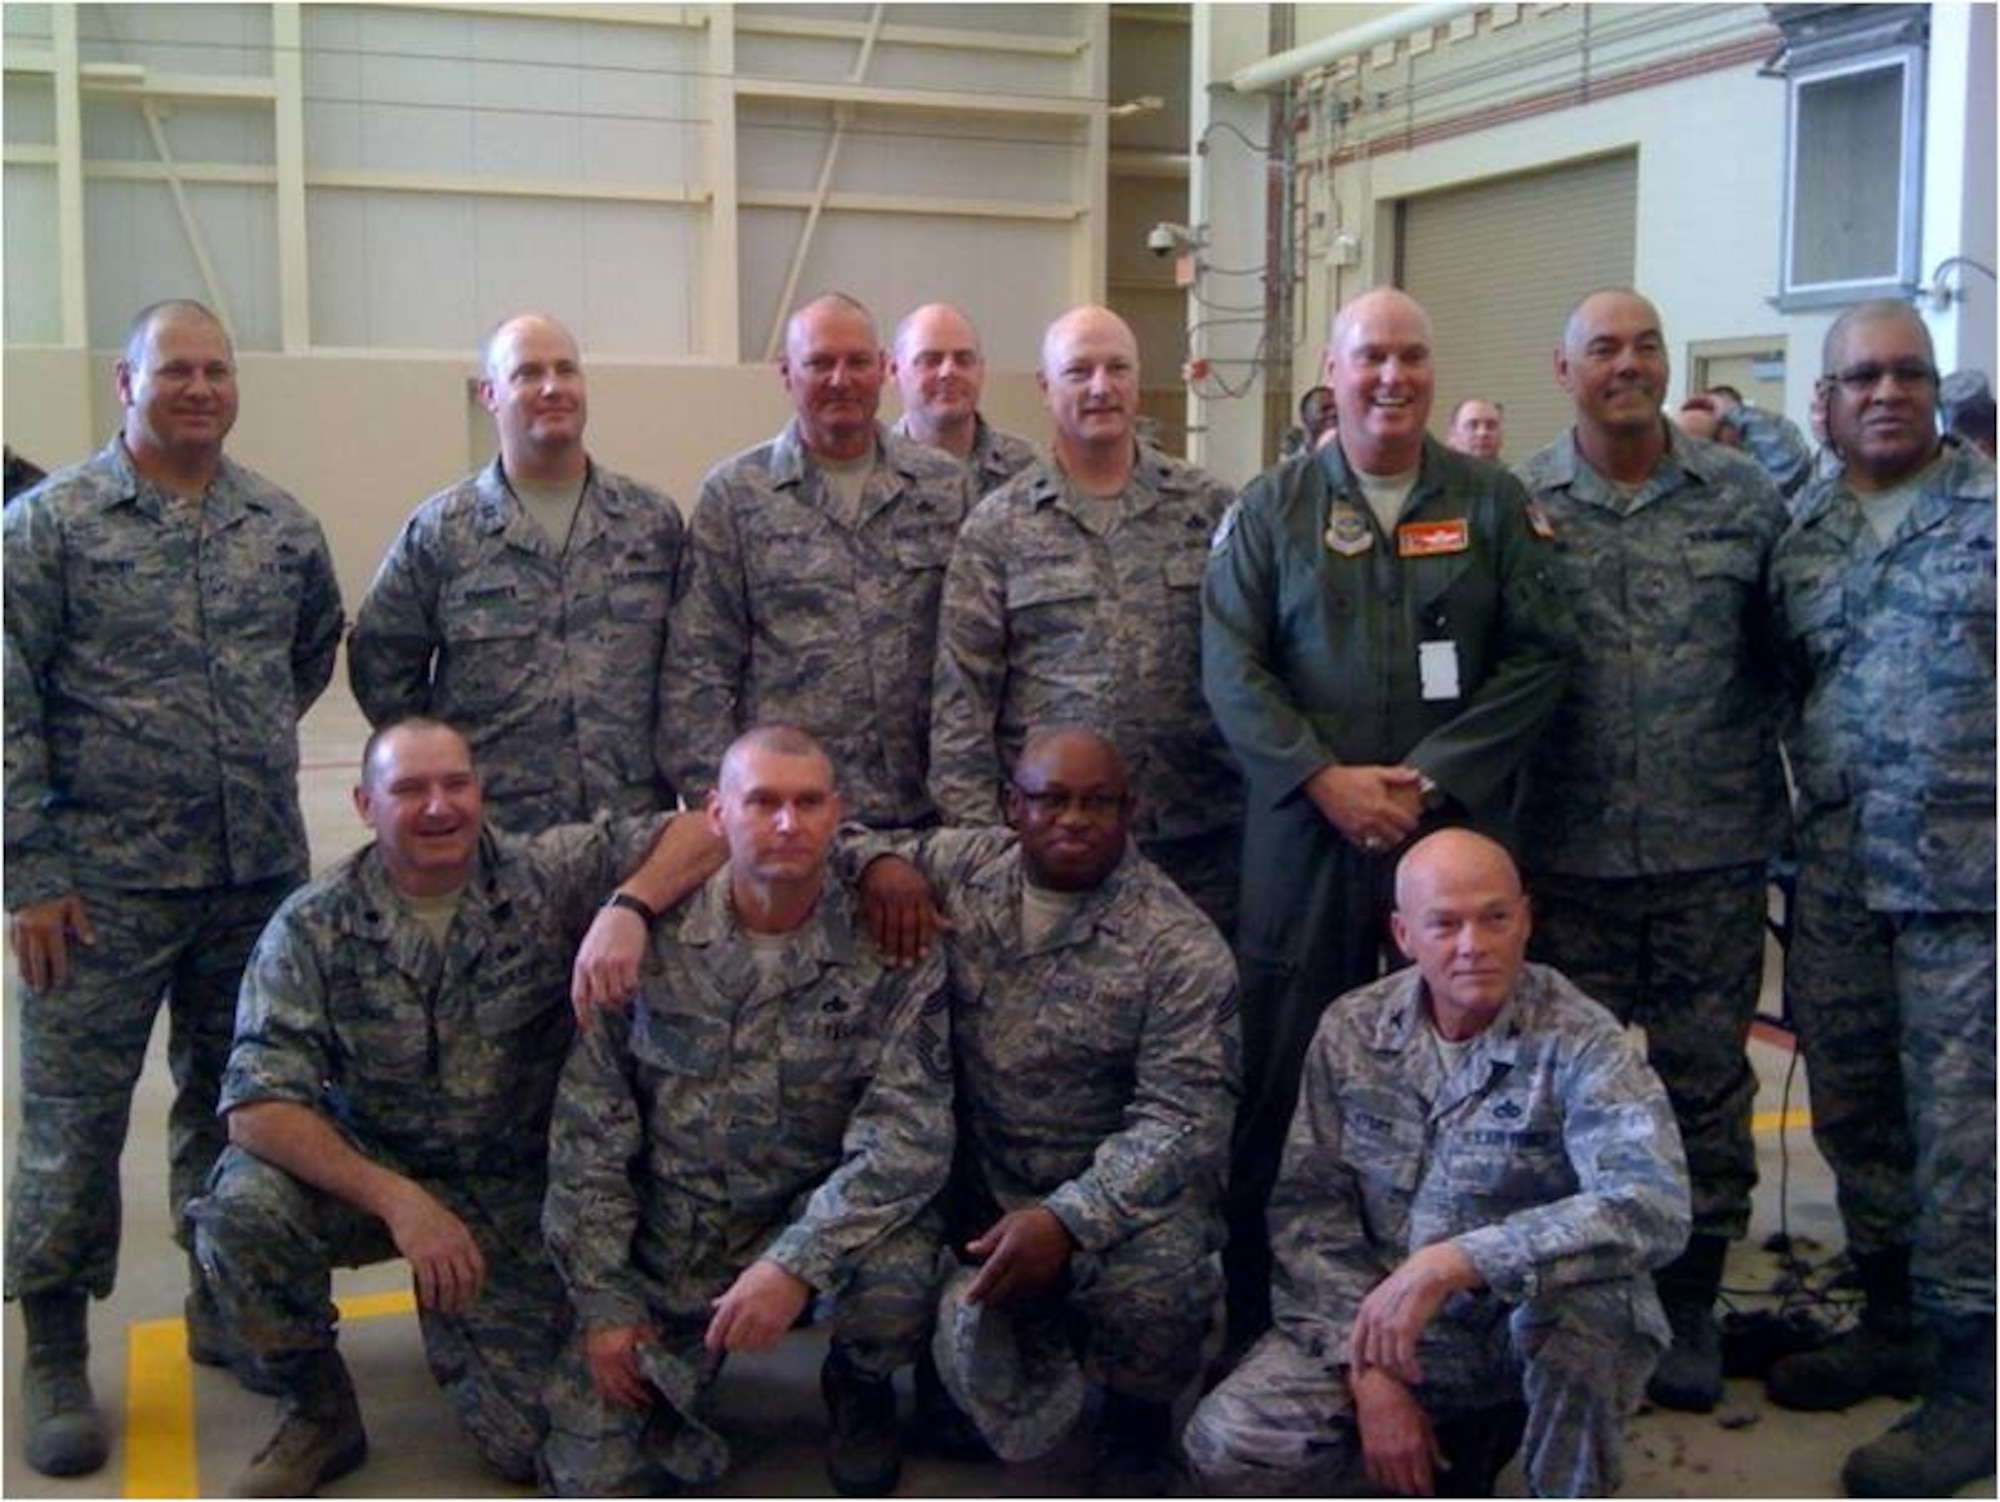 Here are our wonderful LCAP Haircut volunteers (from top left): Chief Darren Brown, Captain Shawn Braddock, Chief Duane Porter, Lt Col Marc Kelly, Lt Col Alan Stephens, Col Harry Montgomery, Chief Matt Walker, Chief Jimmie Jones, Lt Col Keith Stiles, Chief Mark Wagner, Chief Harold Middleton, and our commander Col Randy Myers. 
 
